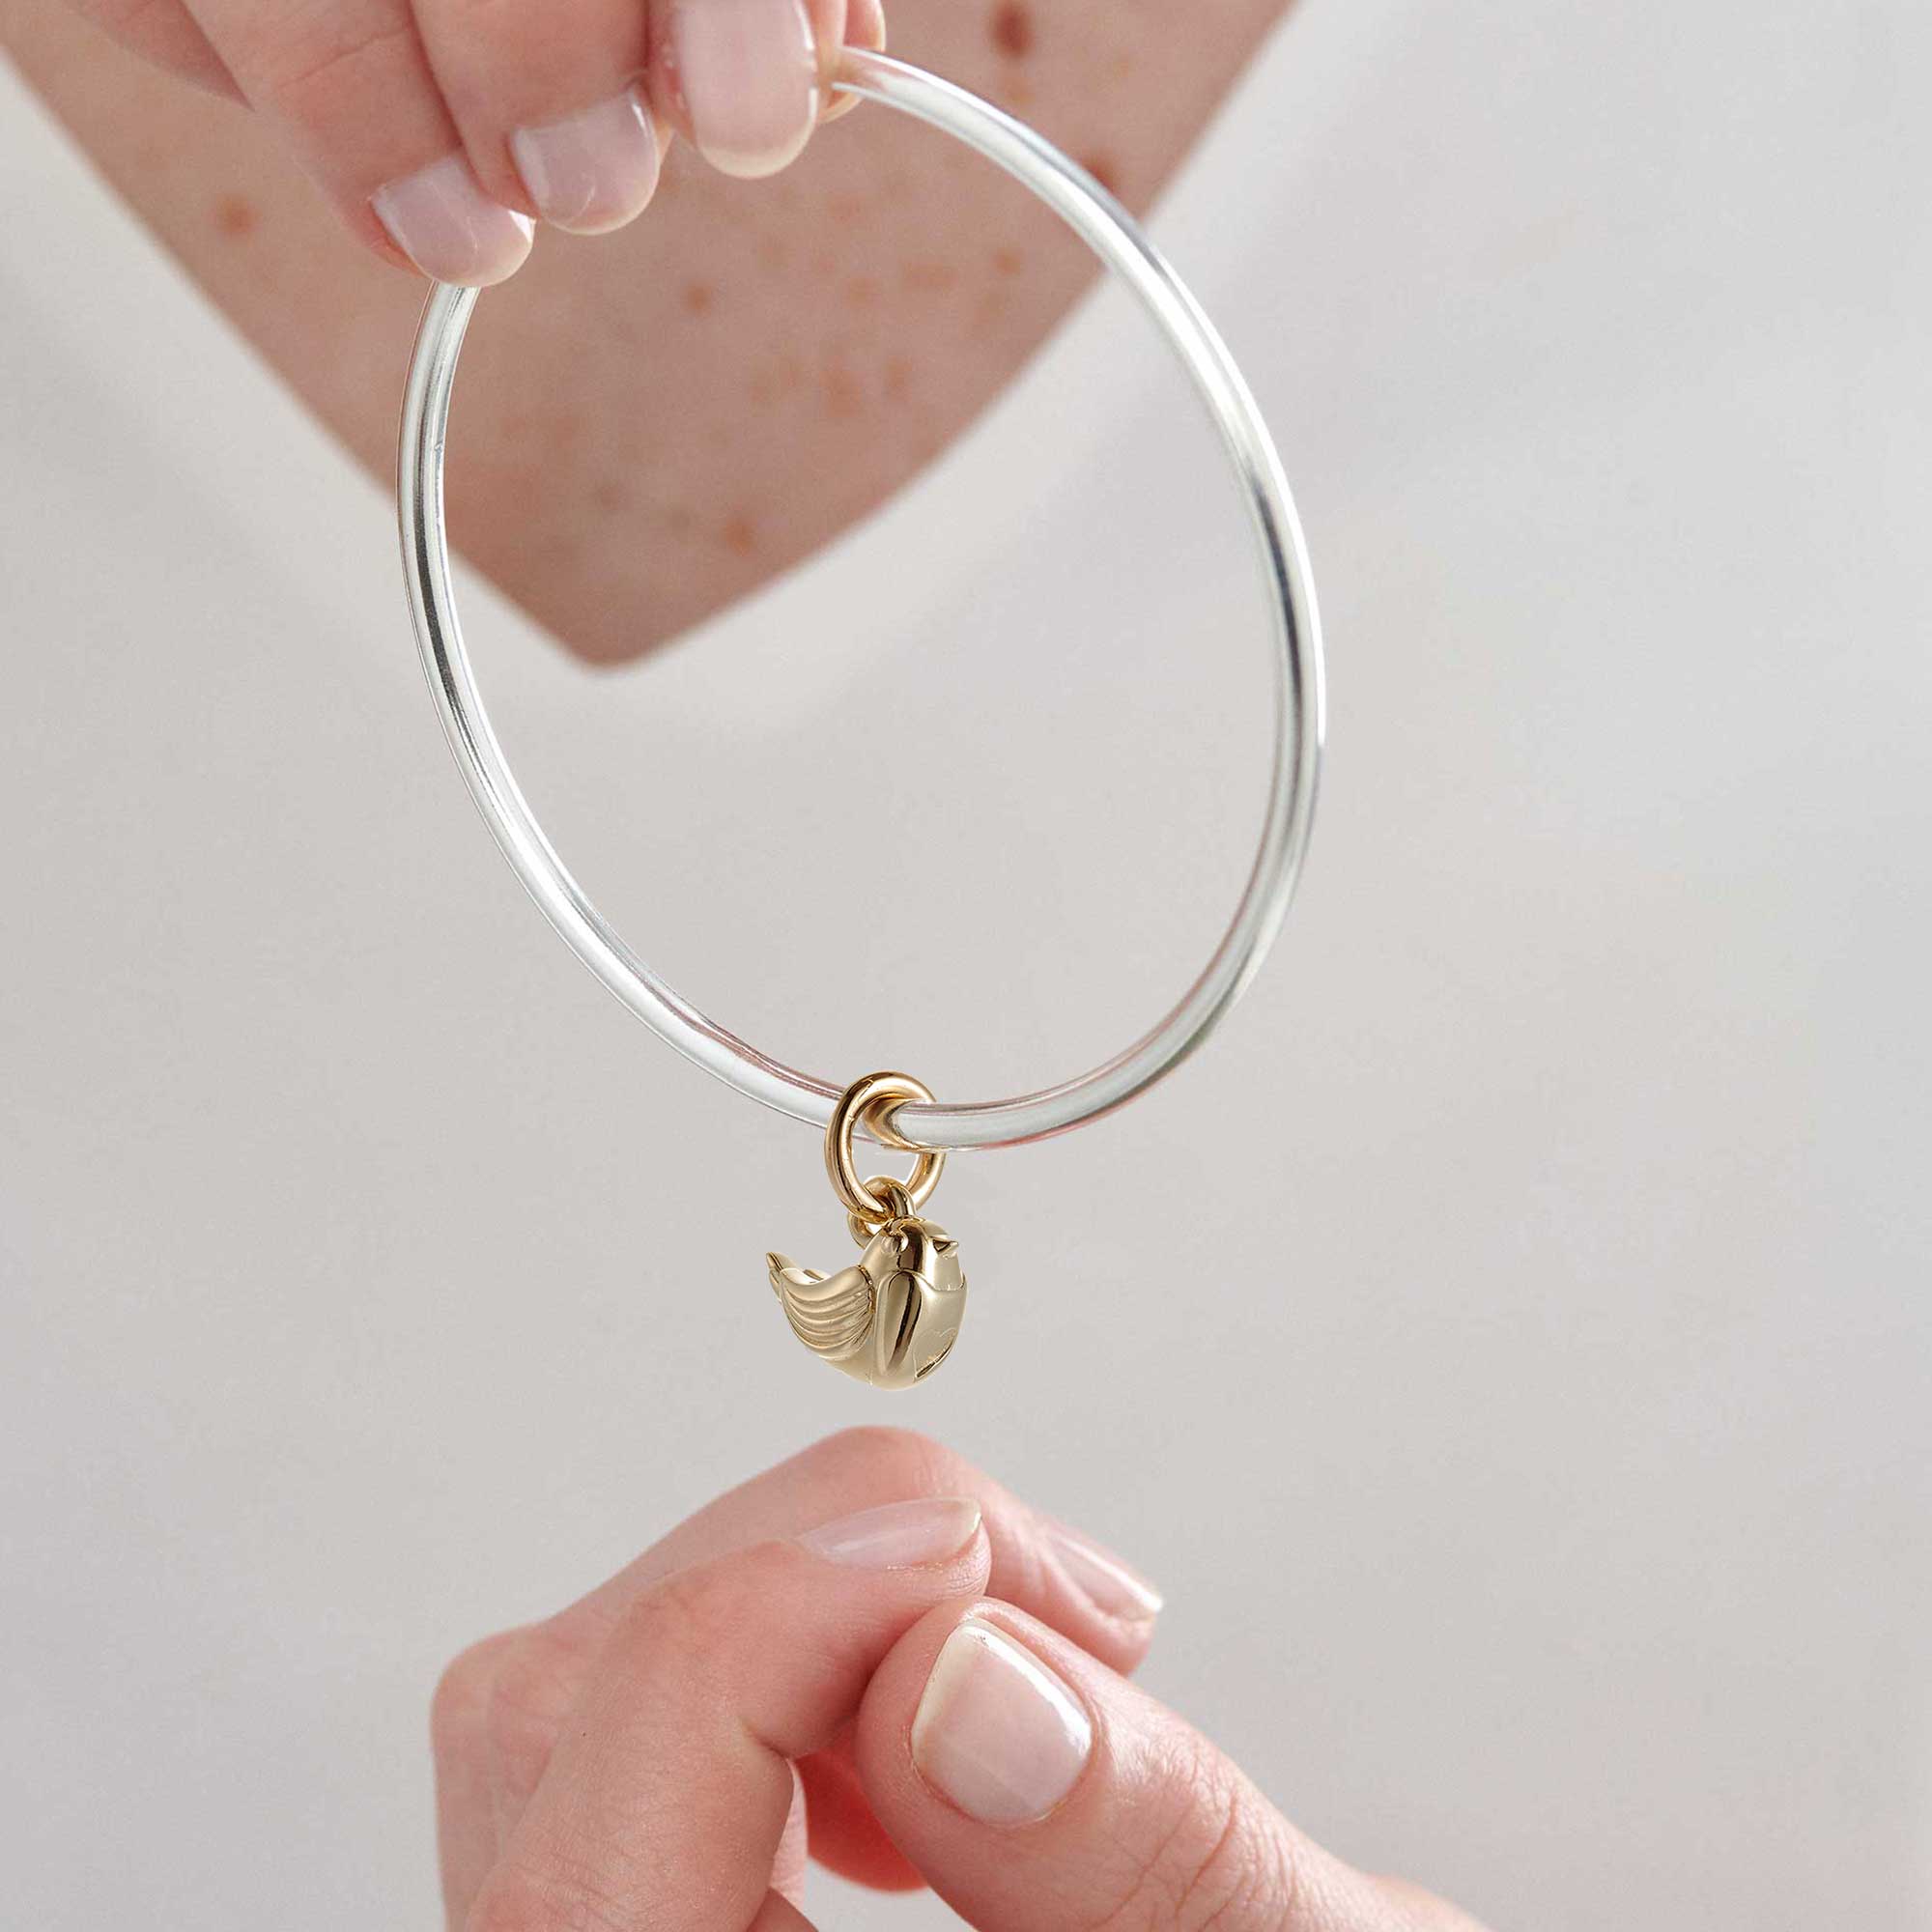 solid gold winter robin redbreast charm bangle for women christmas gift scarlett jewellery